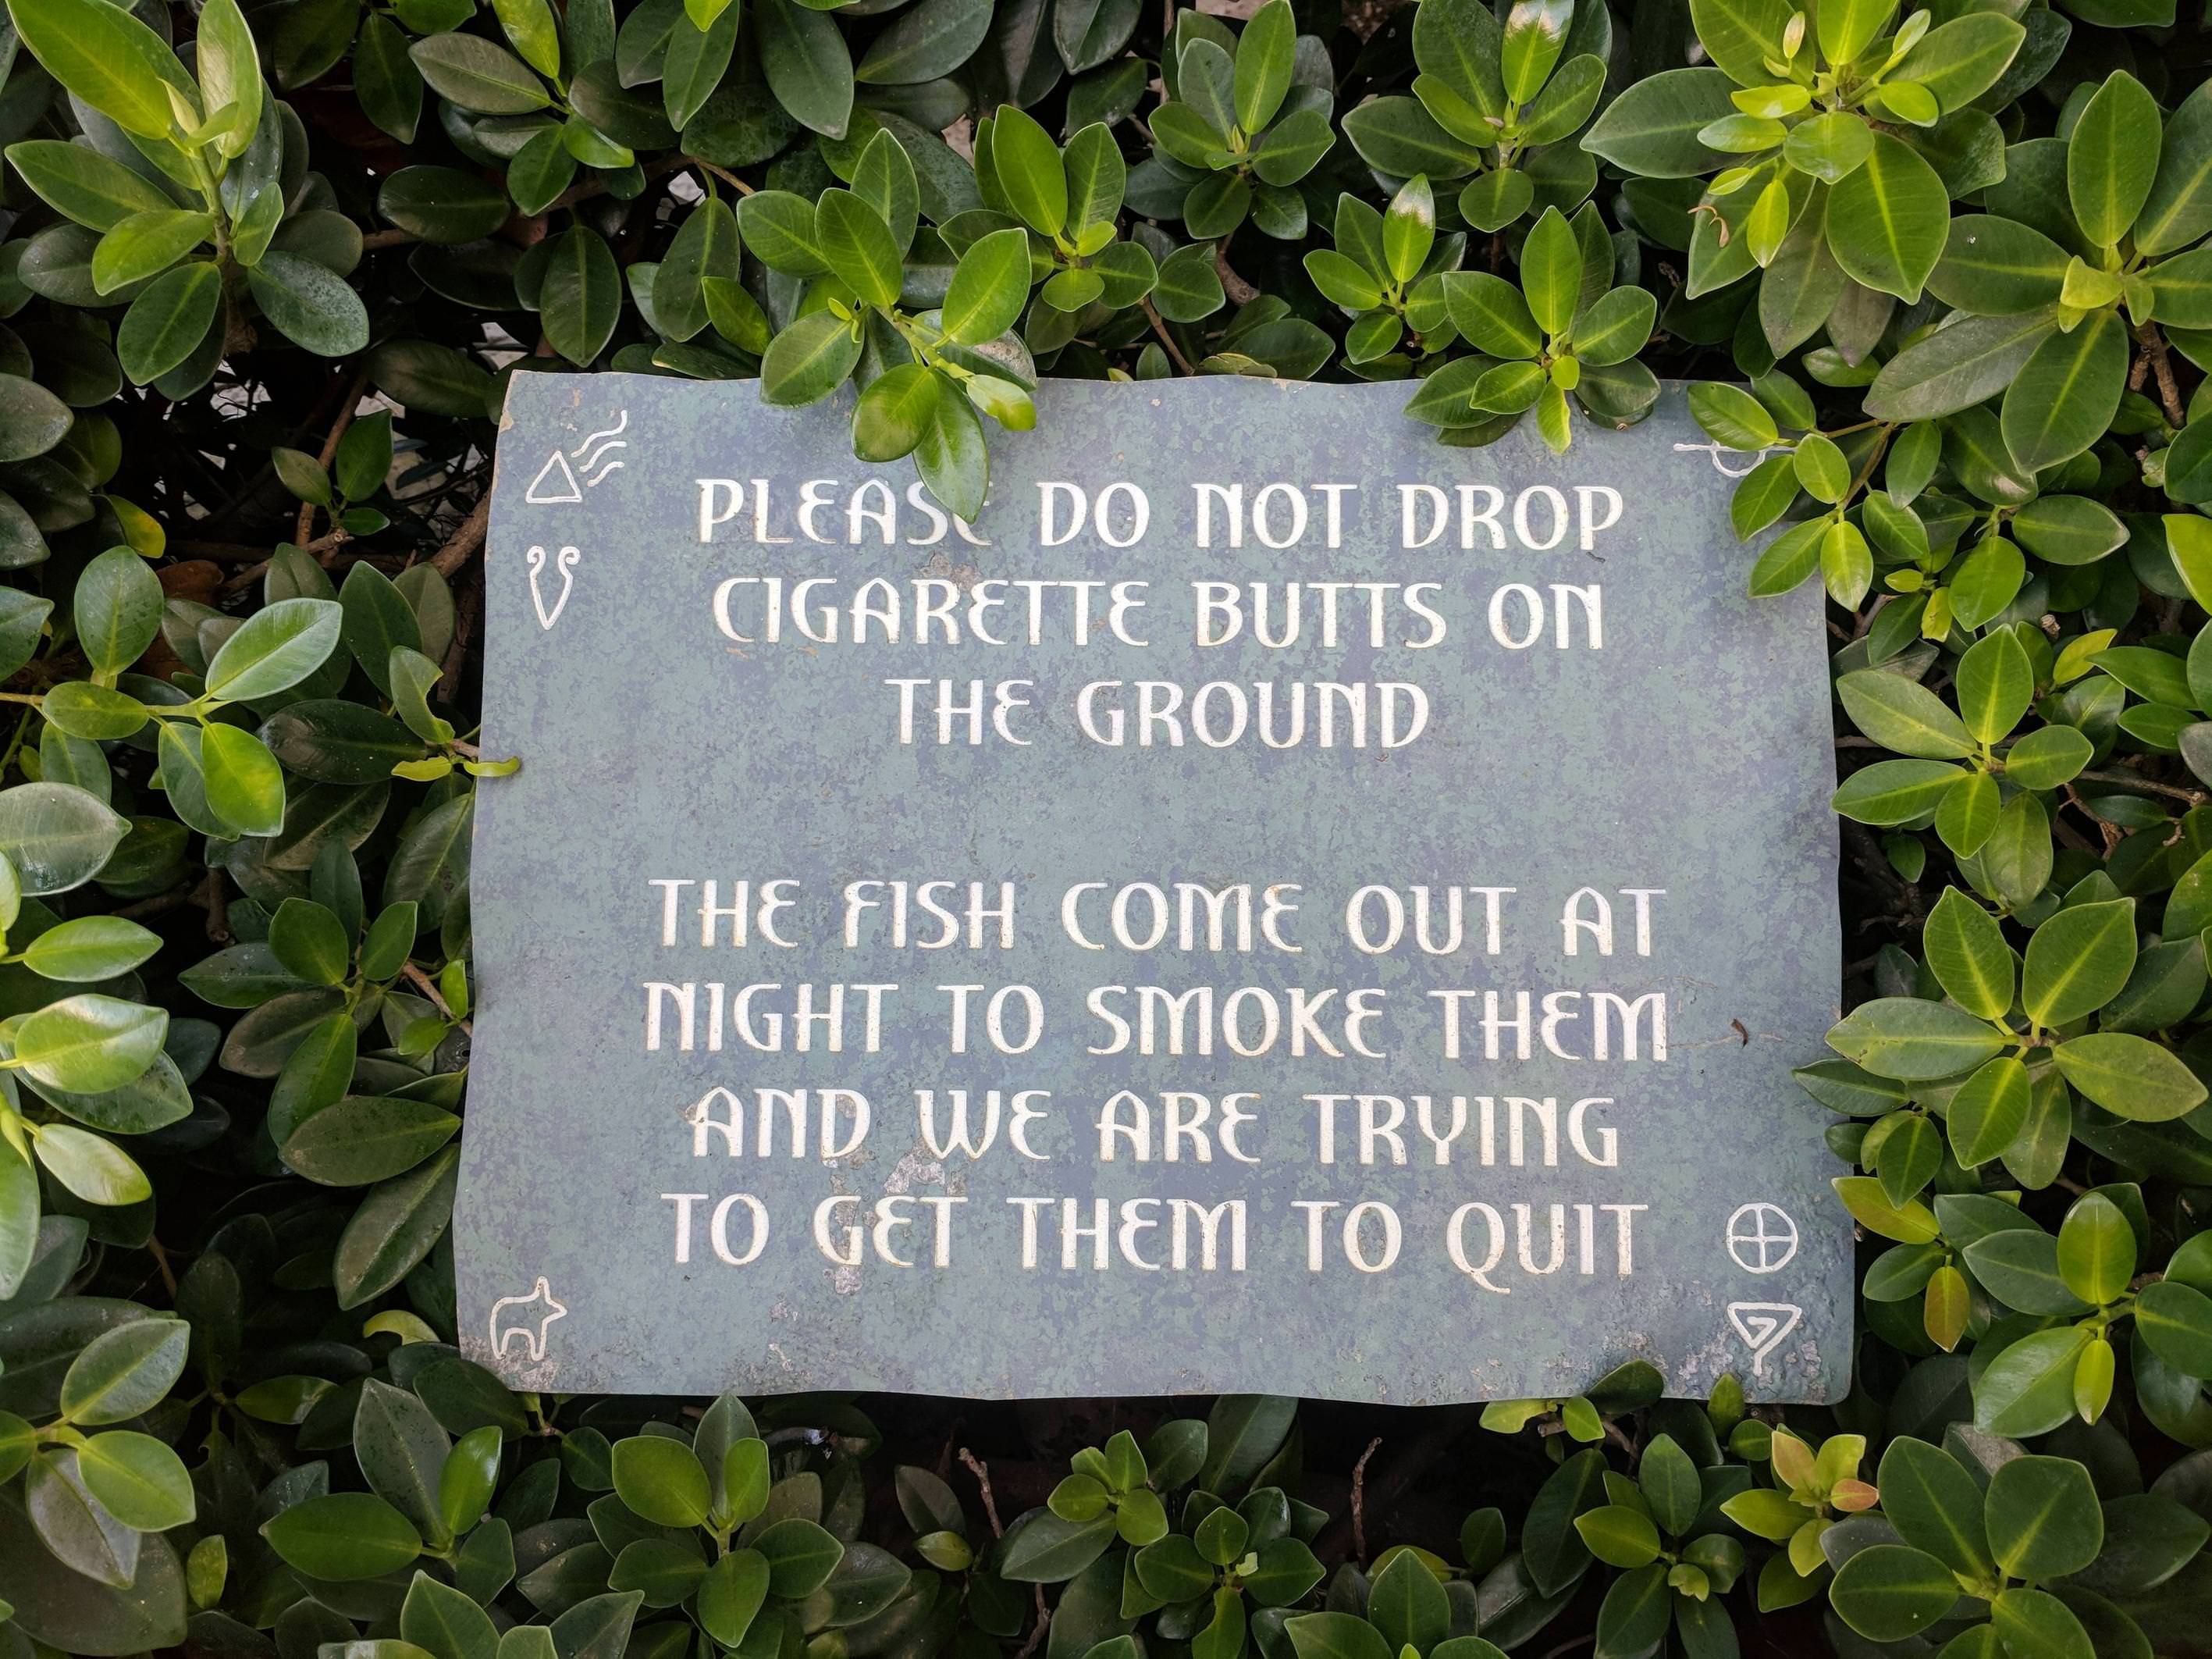 This sign I saw in the Bahamas